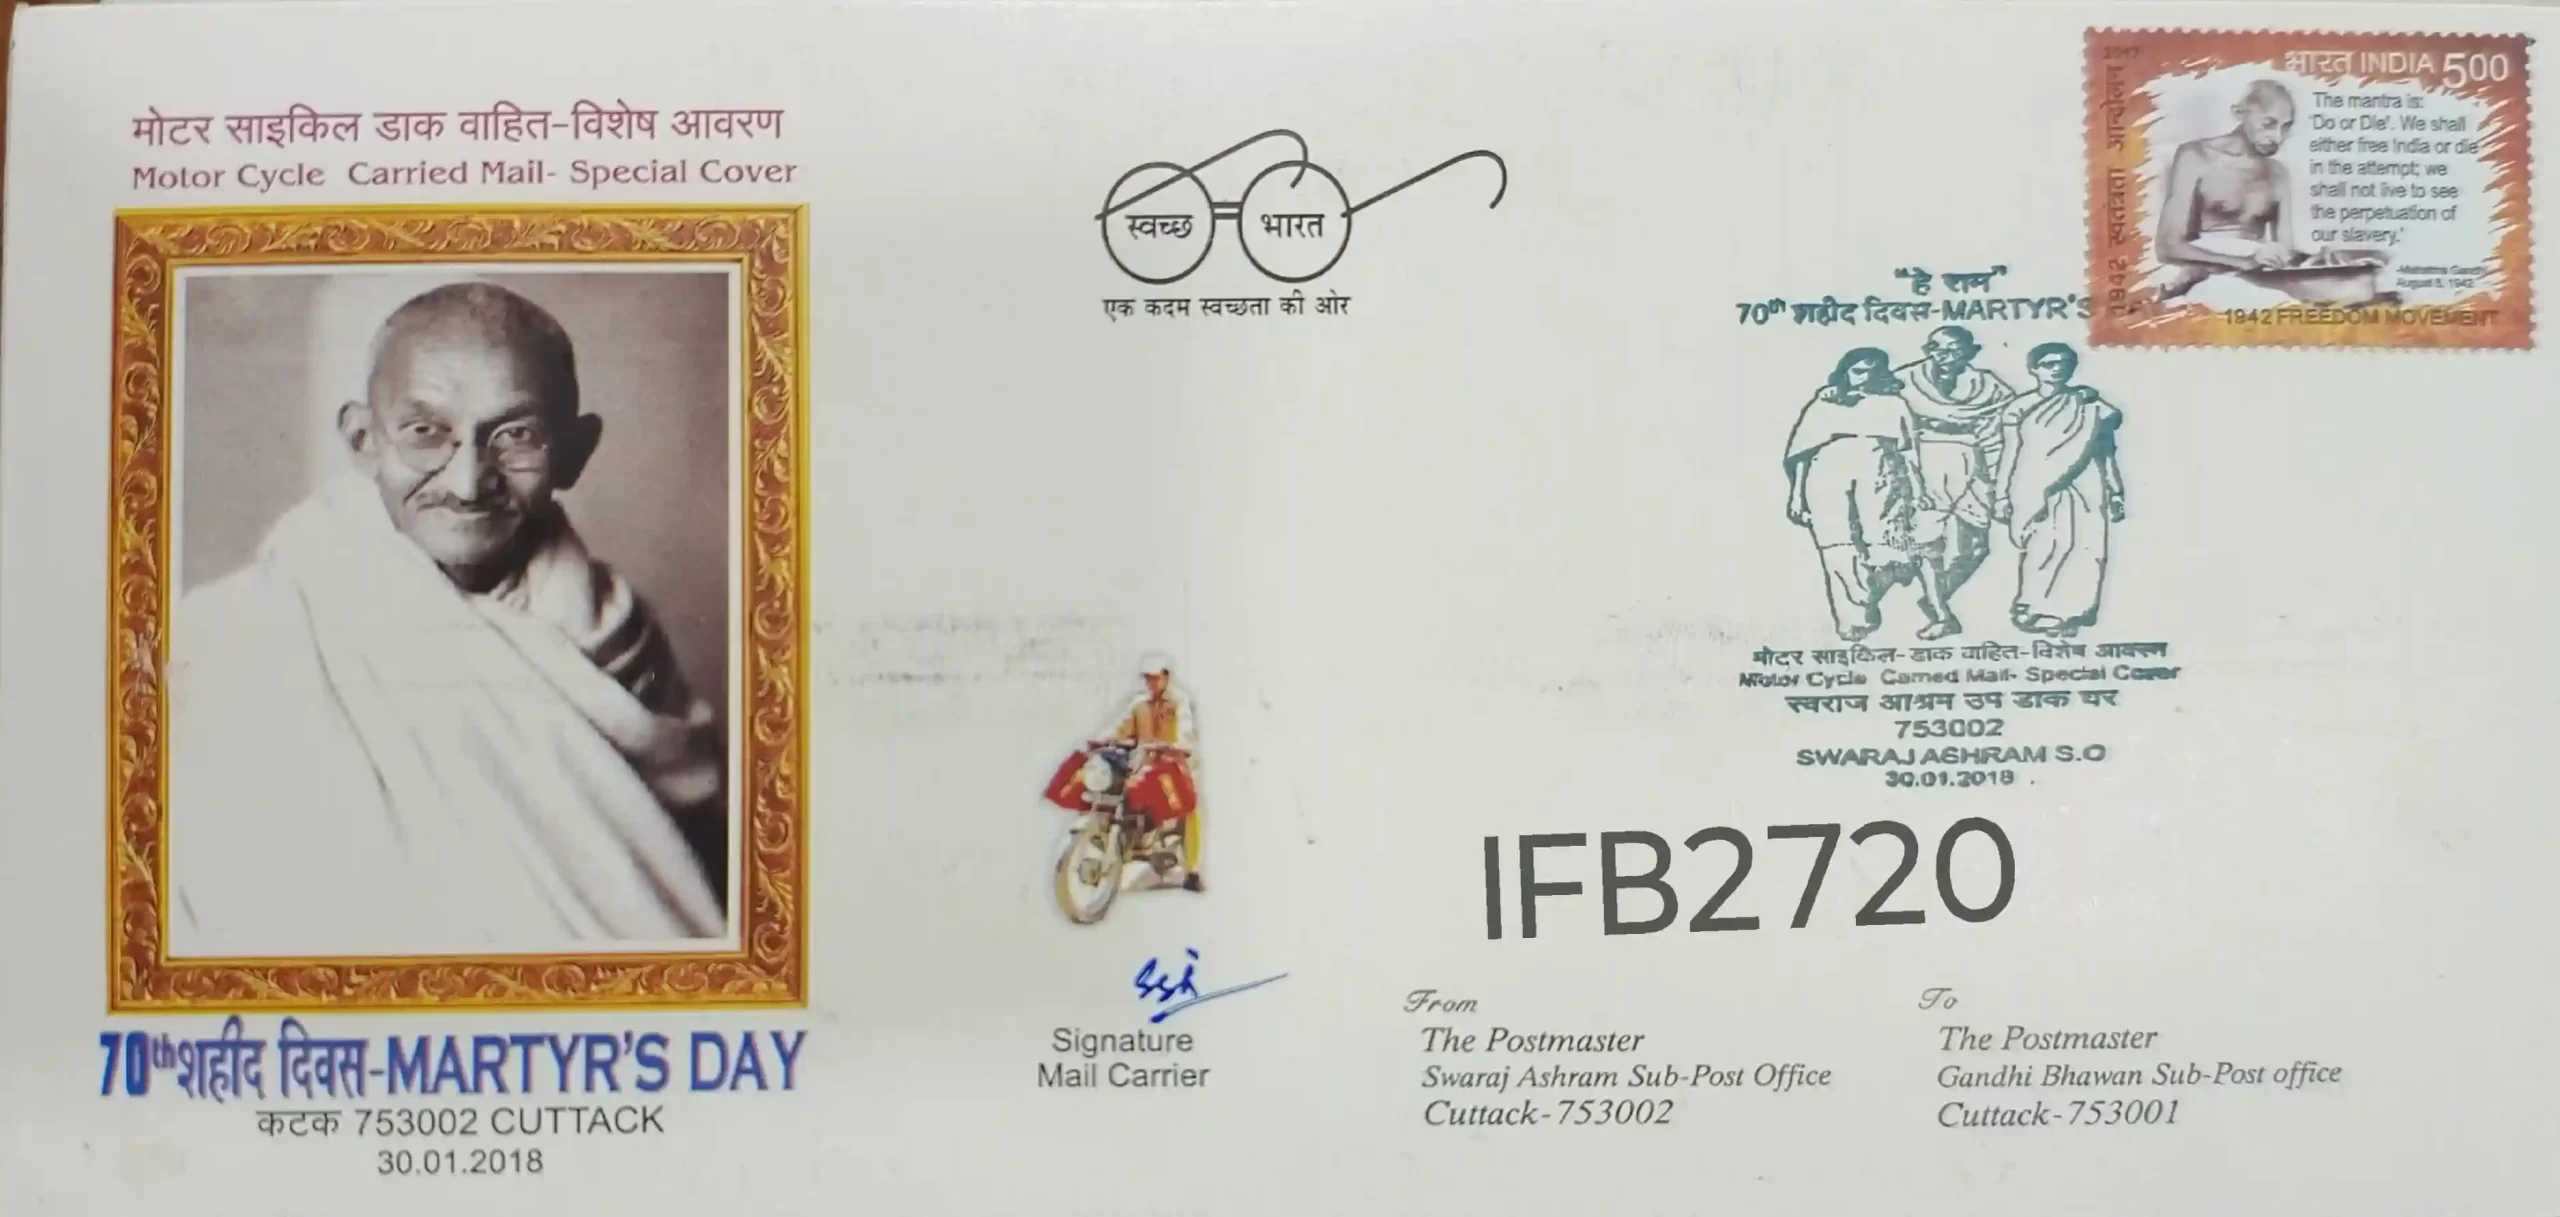 India 2018 Mahatma Gandhi 70th Martyr's Day Motor Cycle Carried Cover Autograph Special Cover Swaraj Ashram S.O cancelled IFB02720